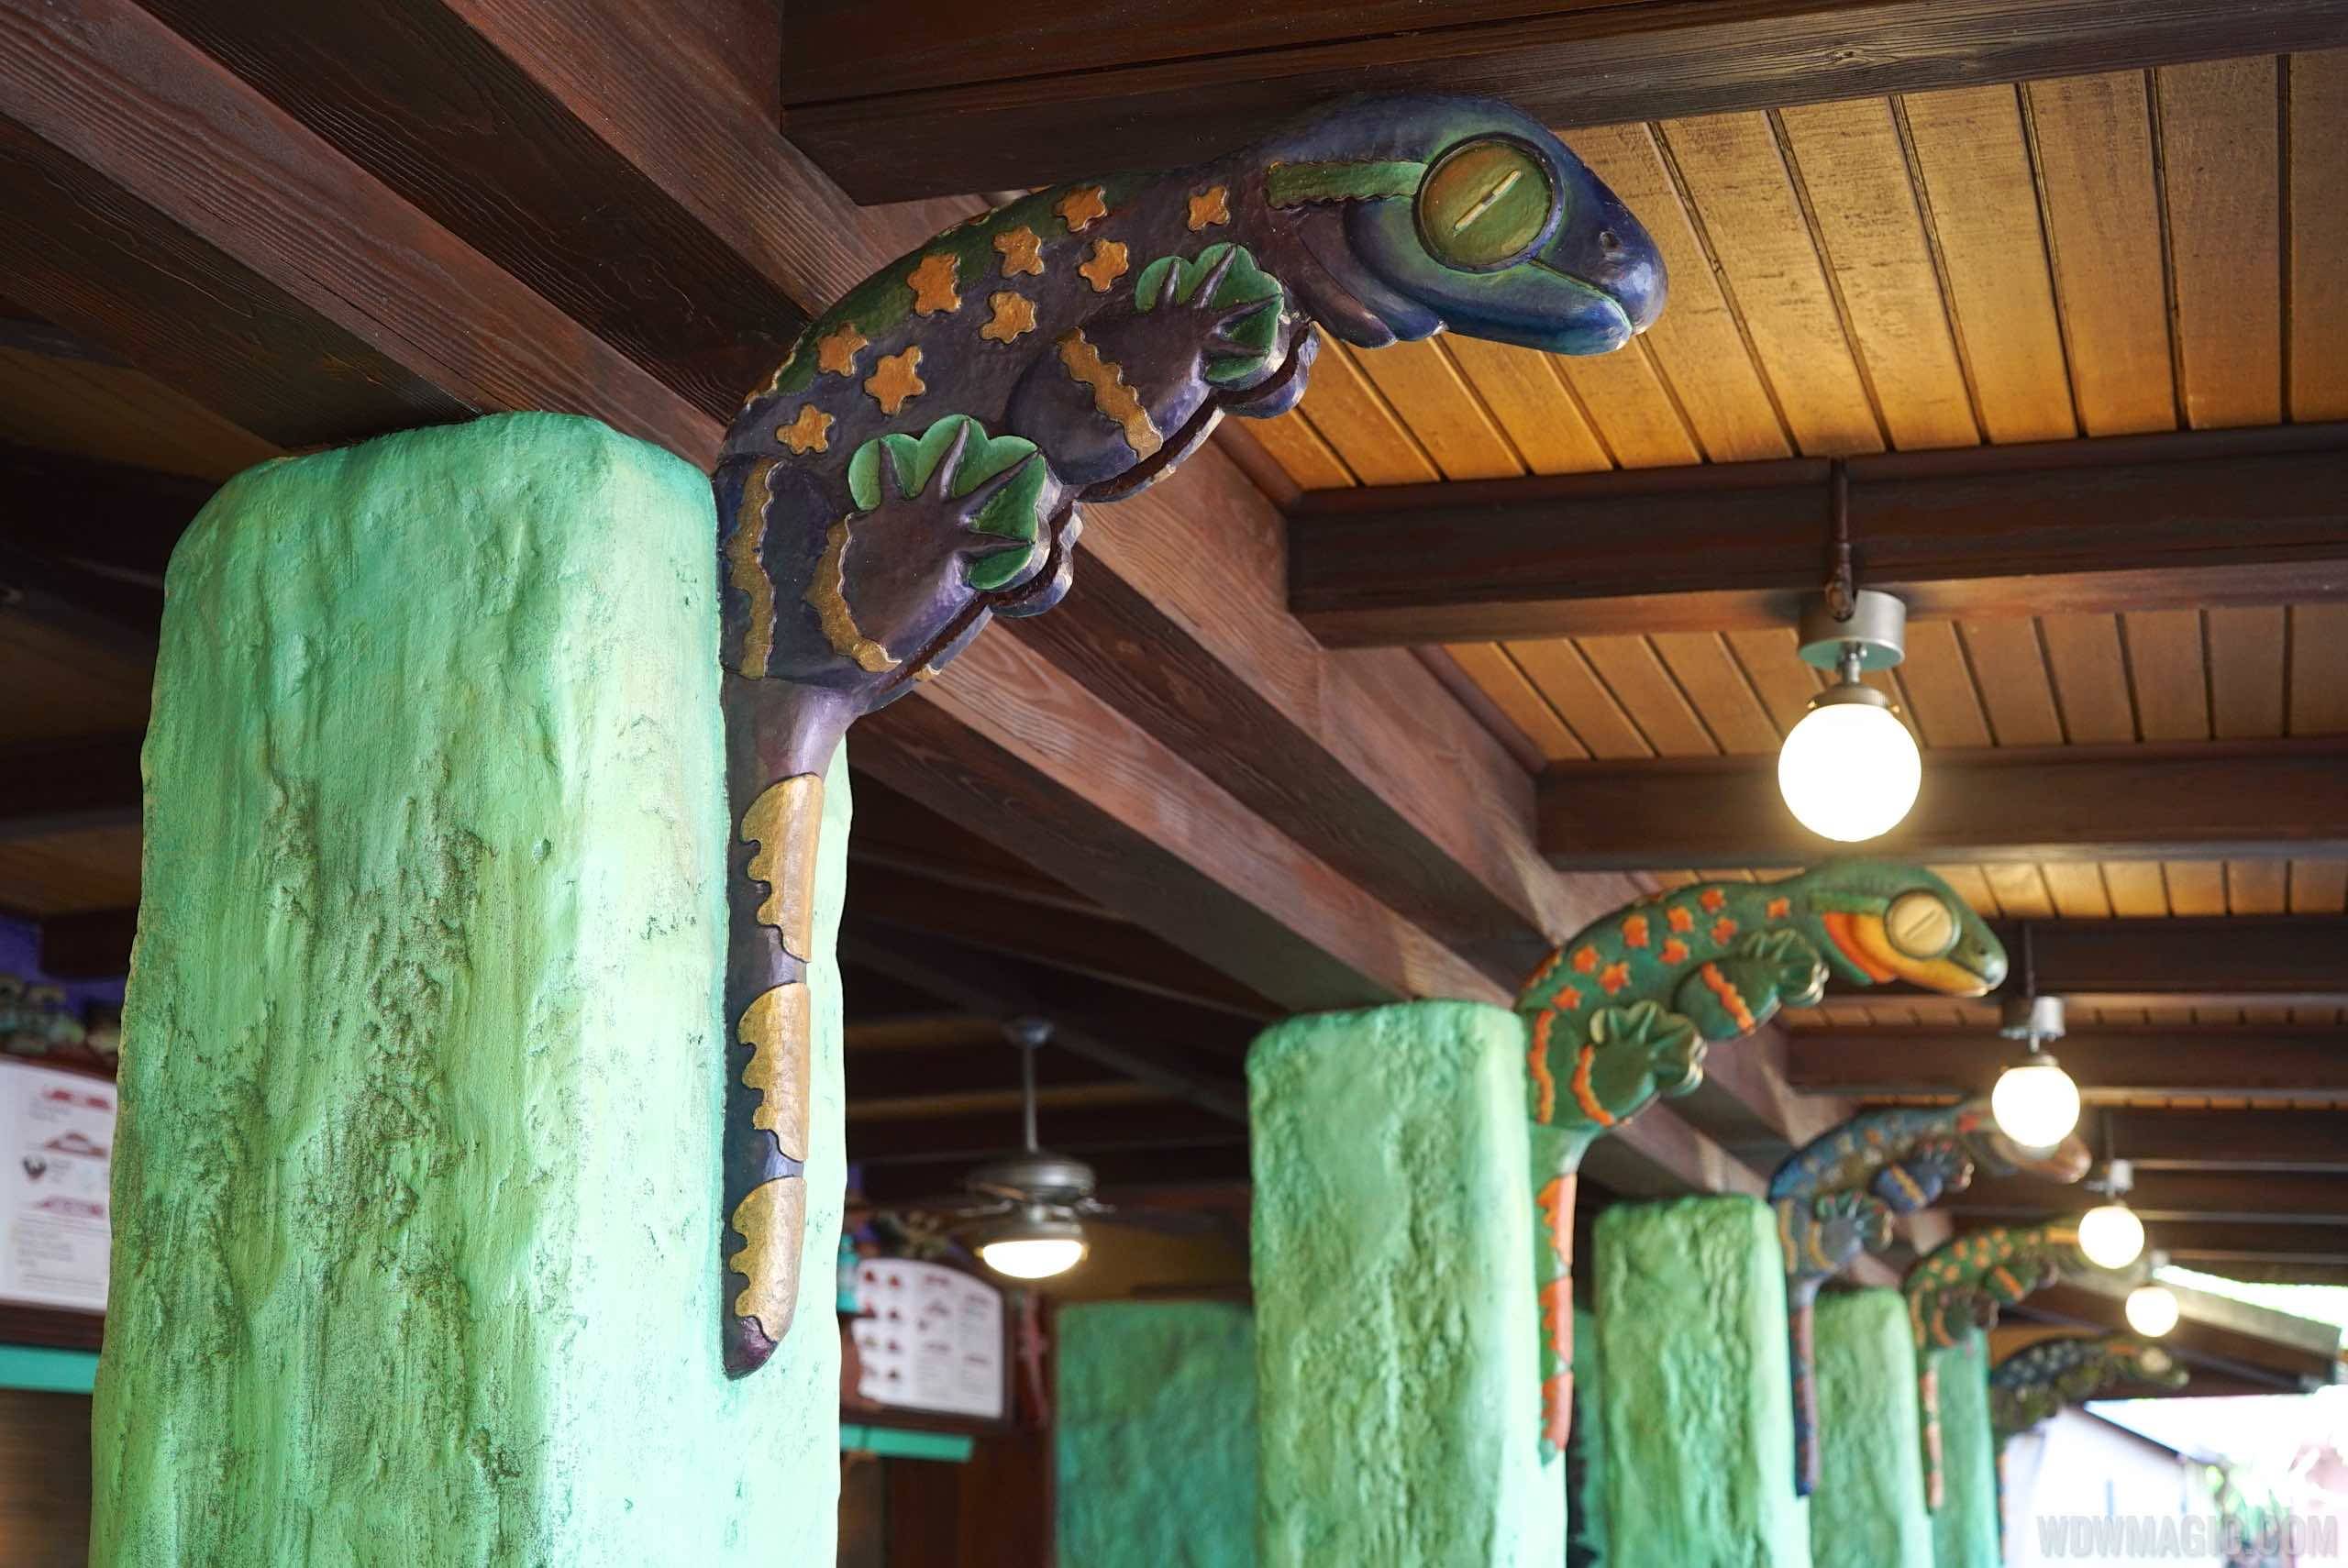 Flame Tree Barbecue reopening June 2015